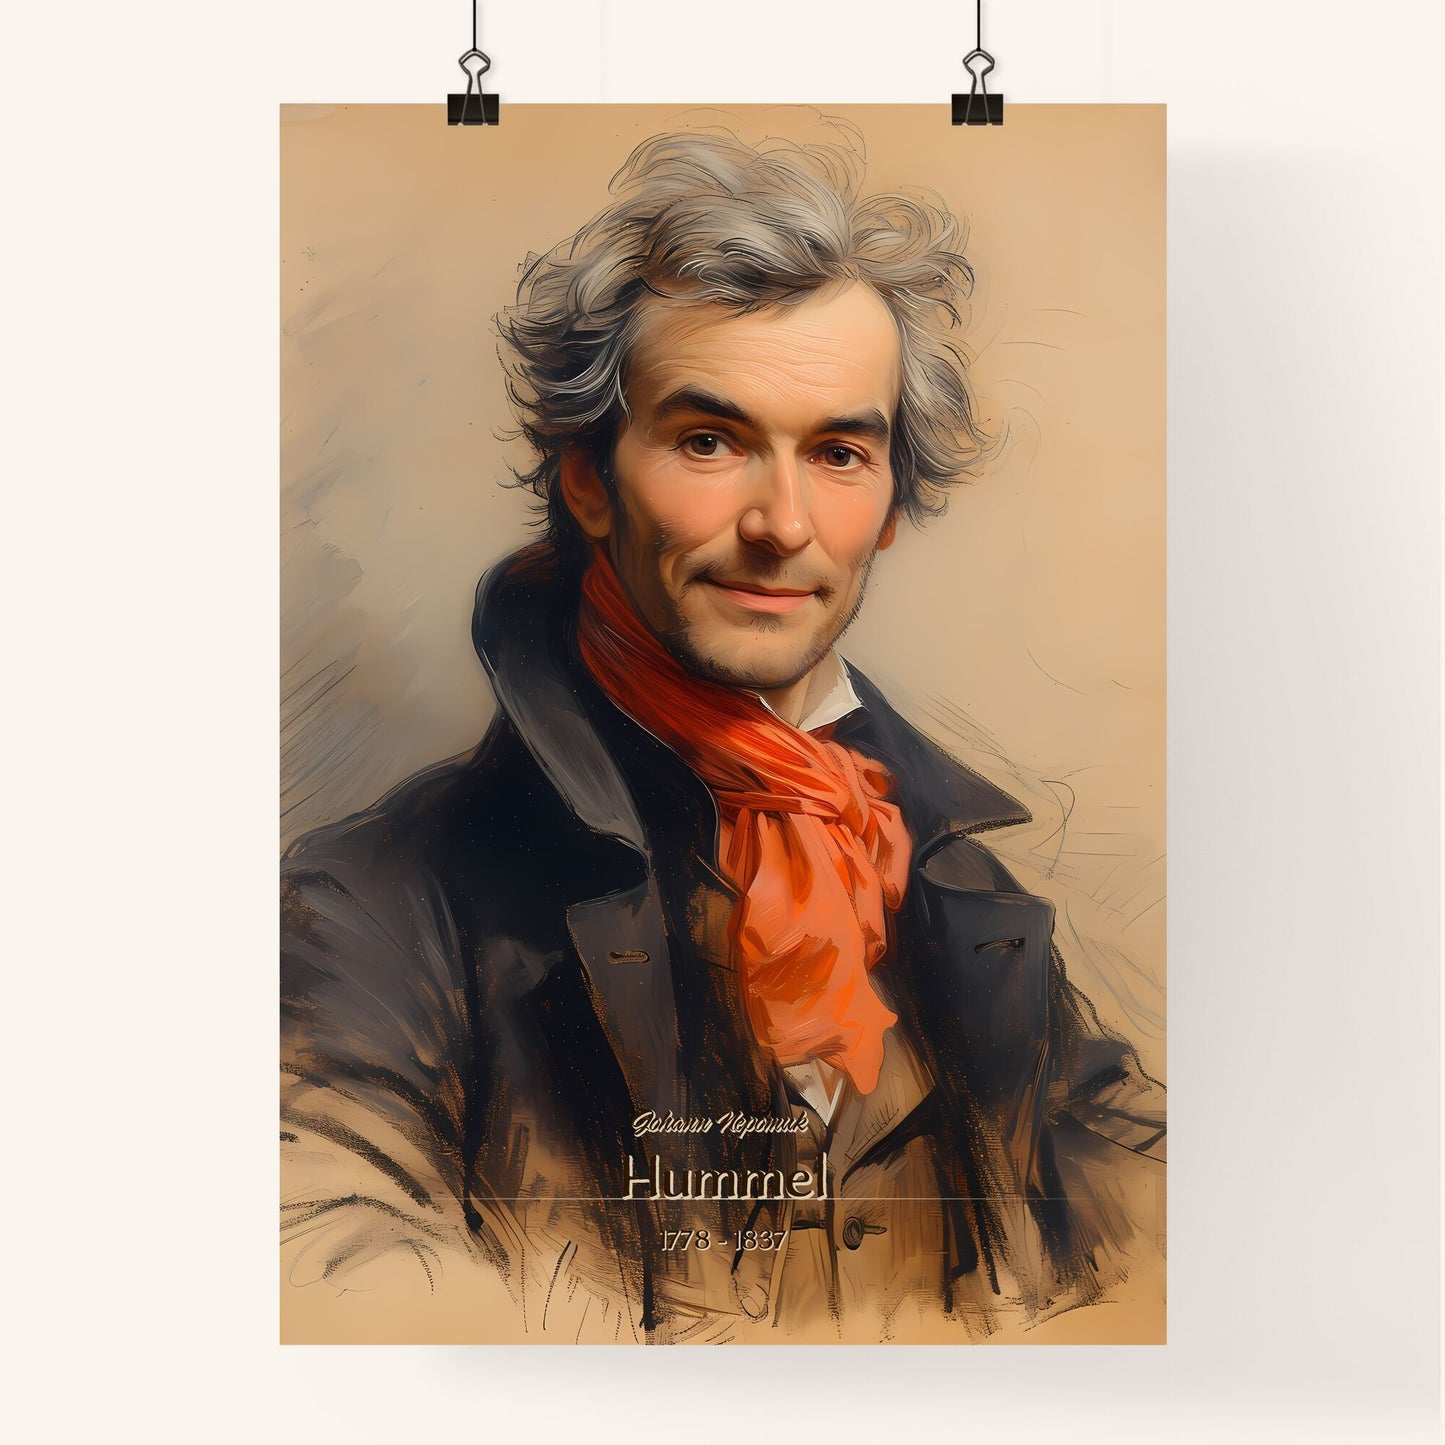 Johann Nepomuk, Hummel, 1778 - 1837, A Poster of a man with a red scarf Default Title